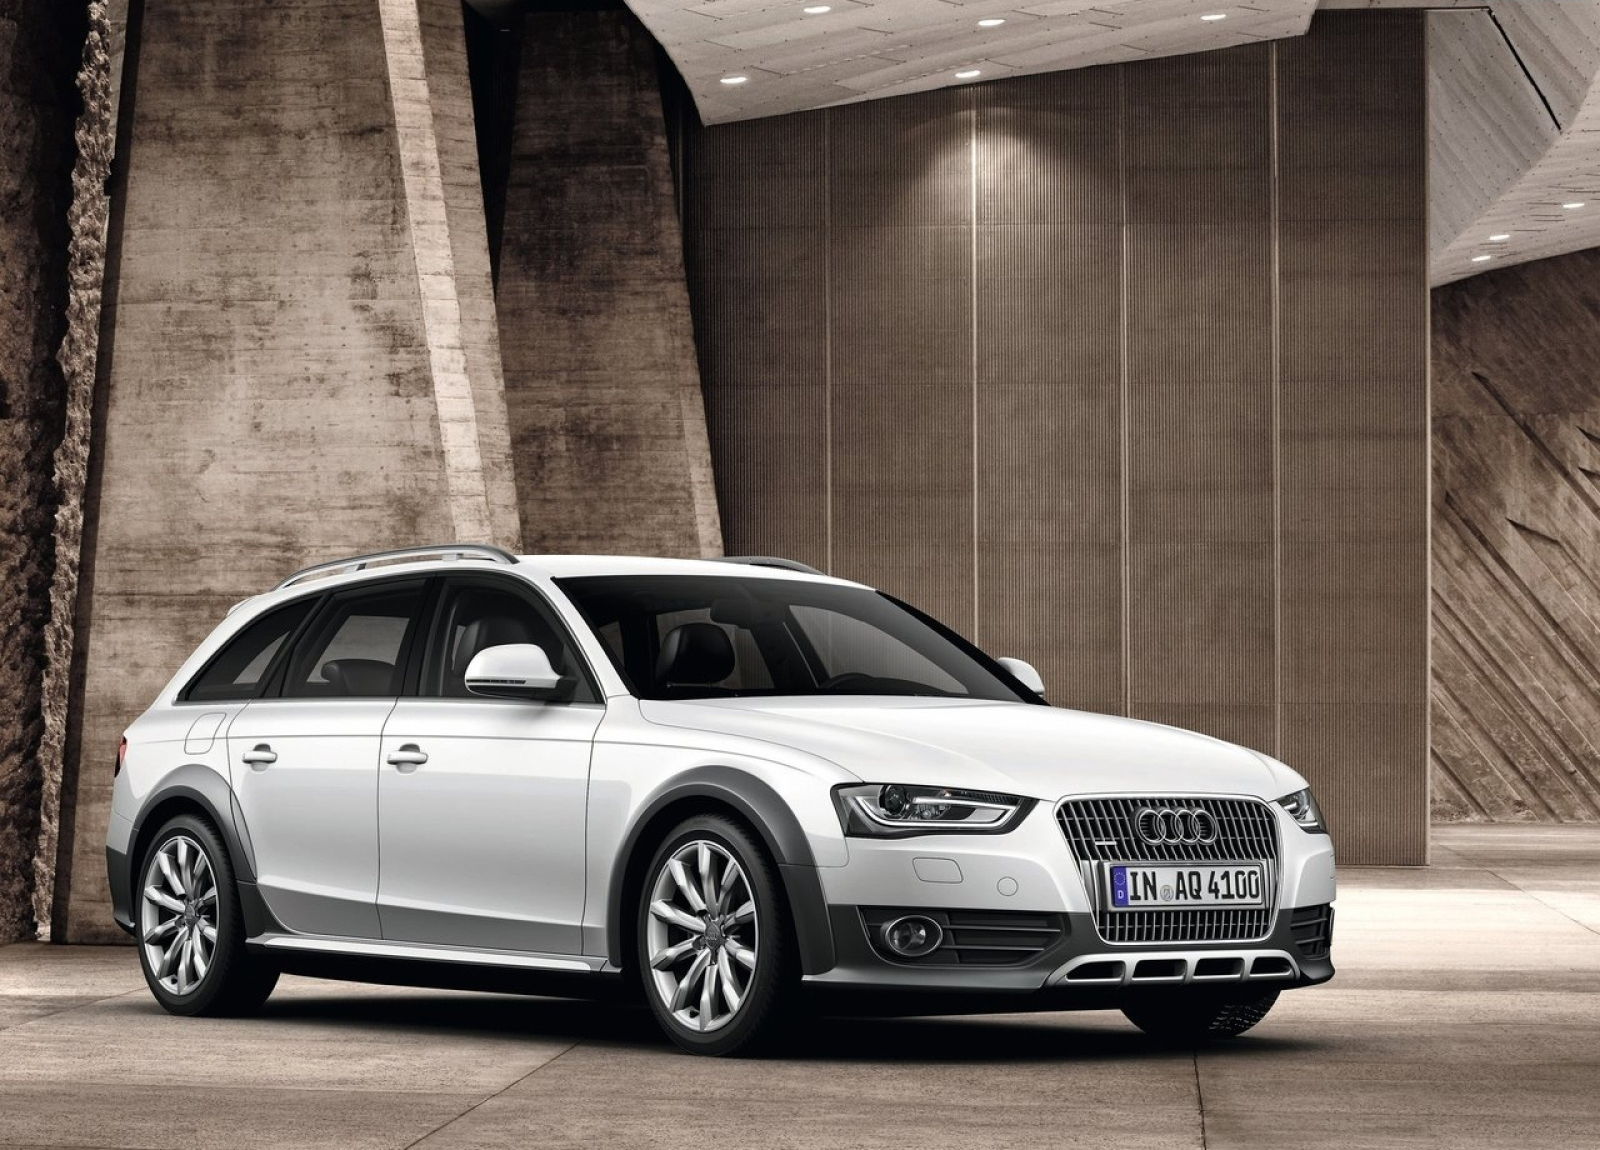 2013 audi a4 allroad 2 0 tdi quattro are you looking for 2013 audi a4 ...